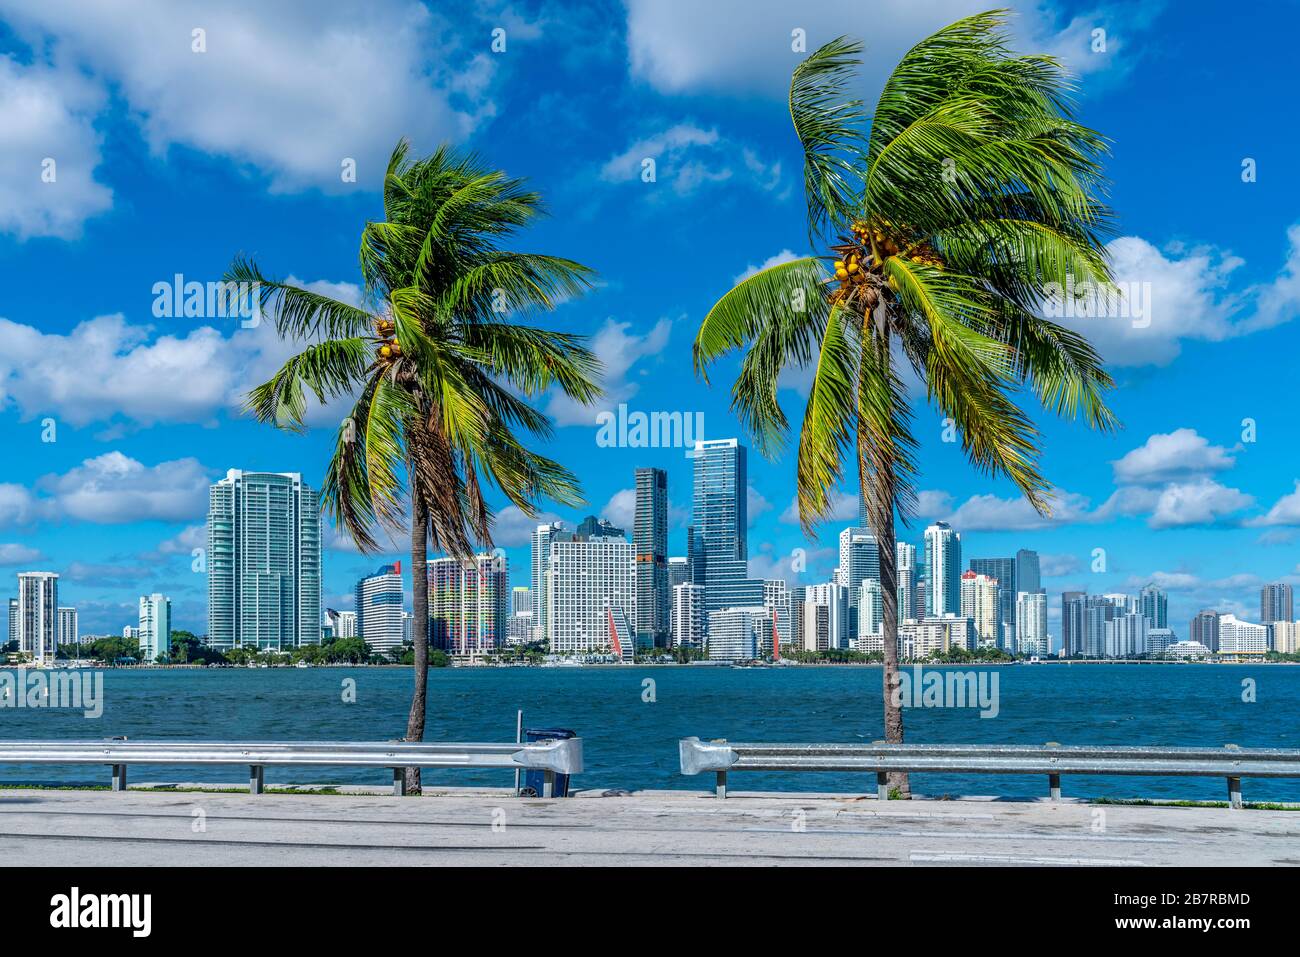 Highrise buildings in Brickell, Miami. Stock Photo